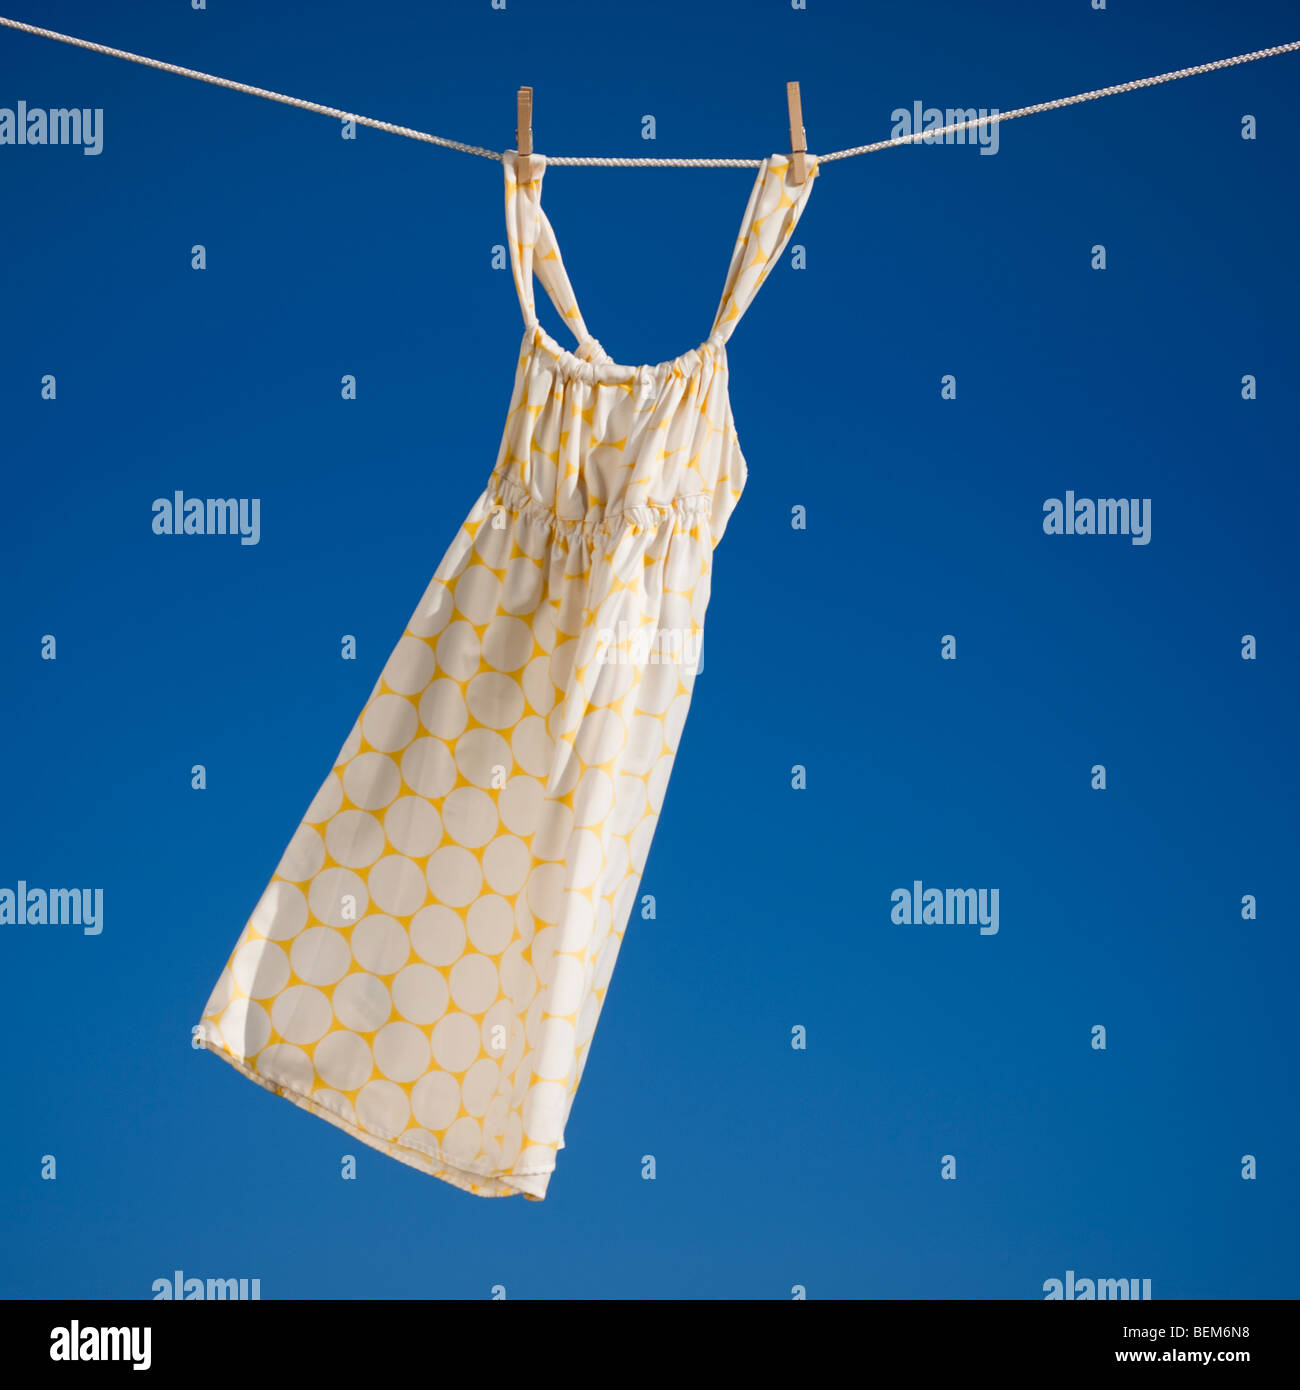 Dress on clothes line Stock Photo